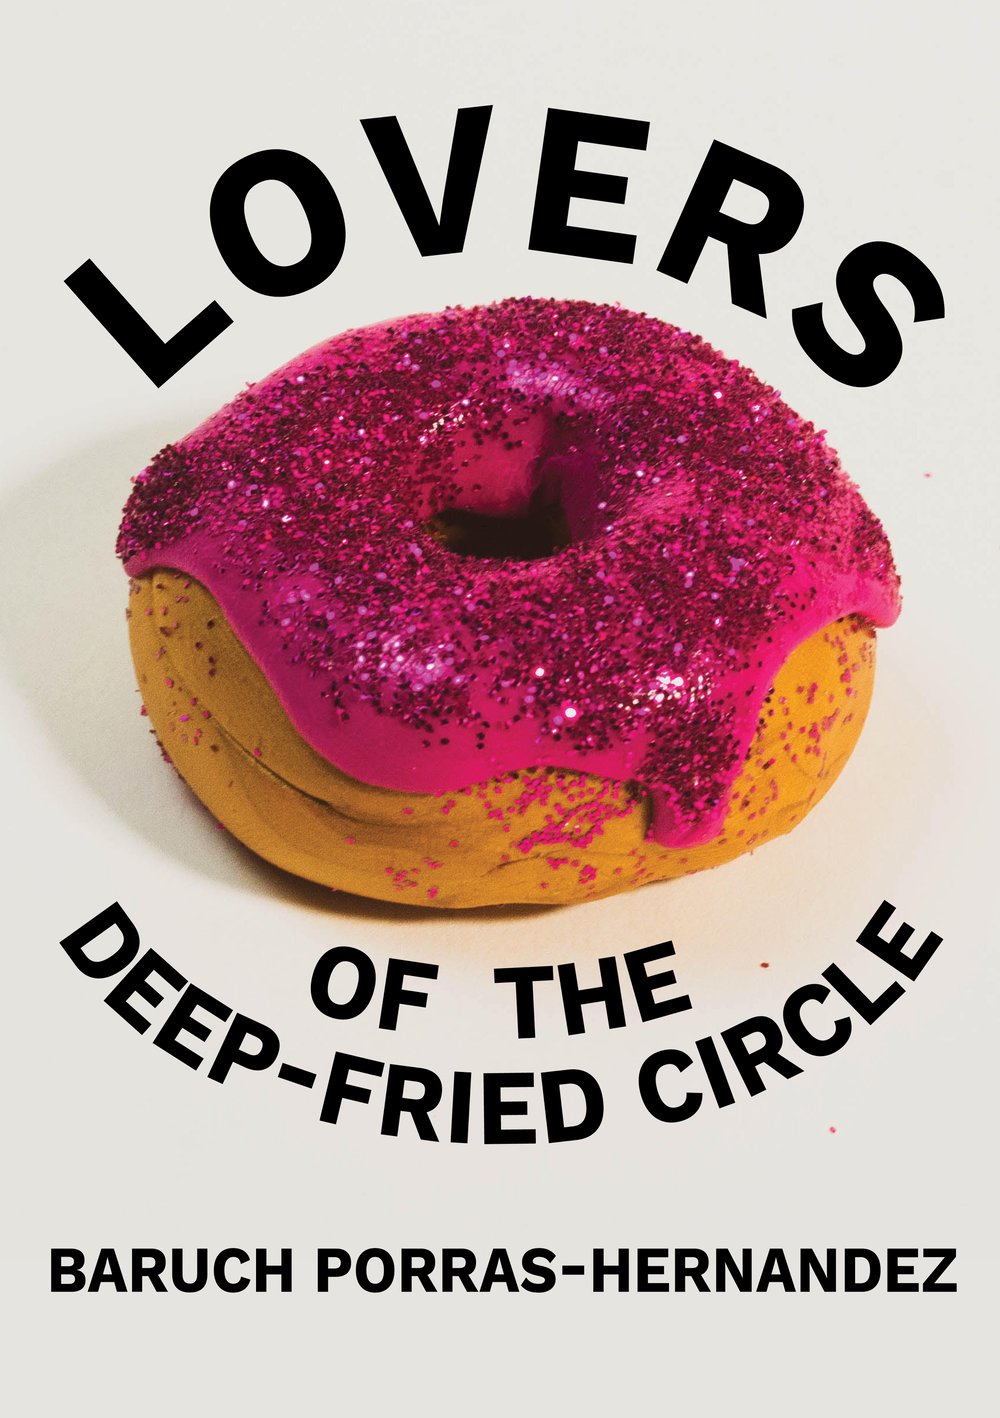 Lovers of the Deep-Fried Circle (THE FUNNY ONE) by Baruch Porras-Hernandez